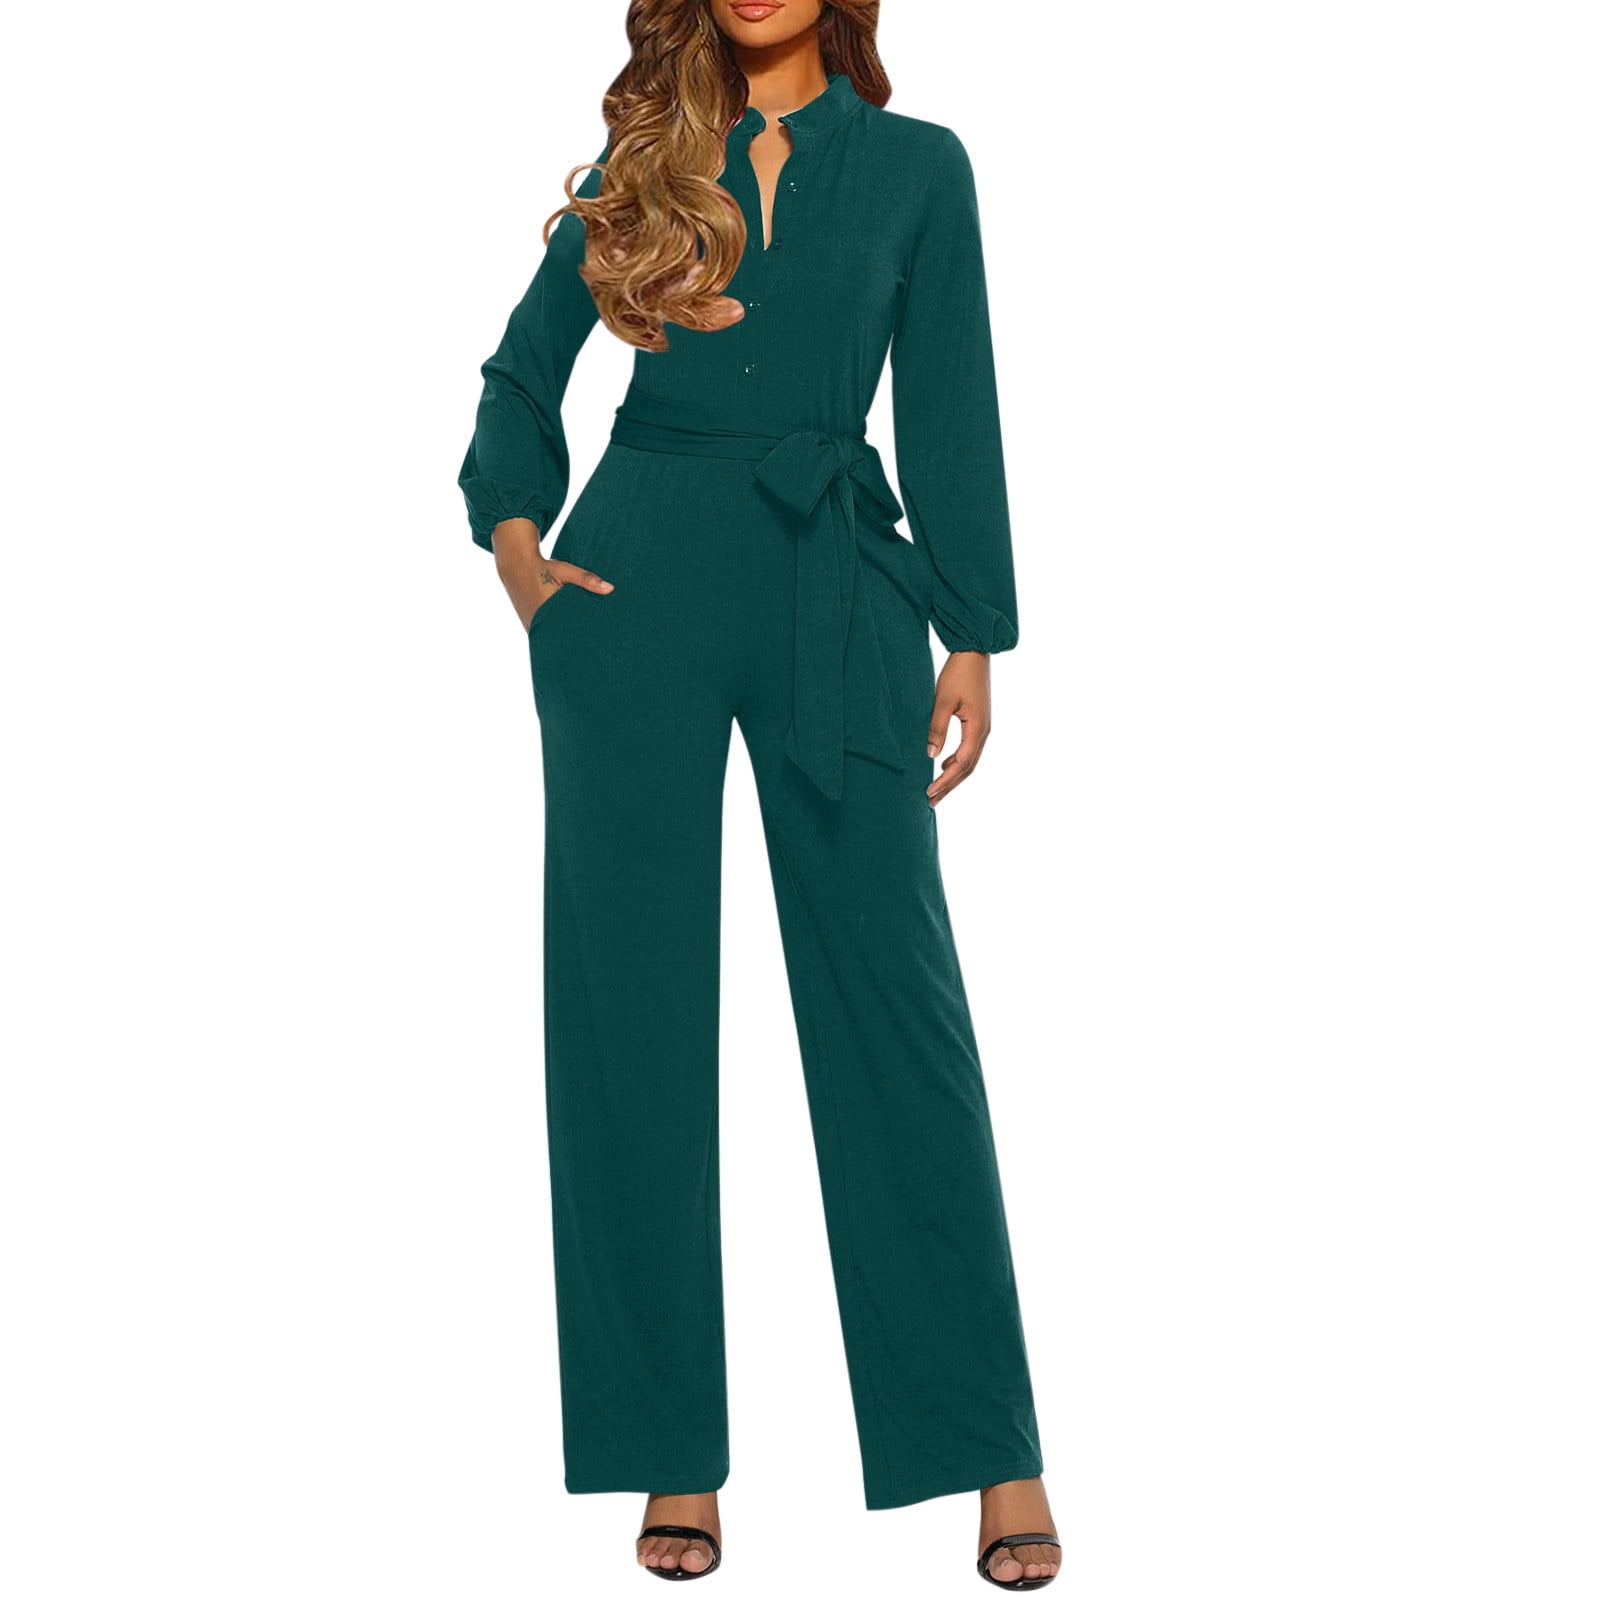 Wozhidaoke jumpsuits for women Jumpsuits Loose Fit Belted Dressy Long ...